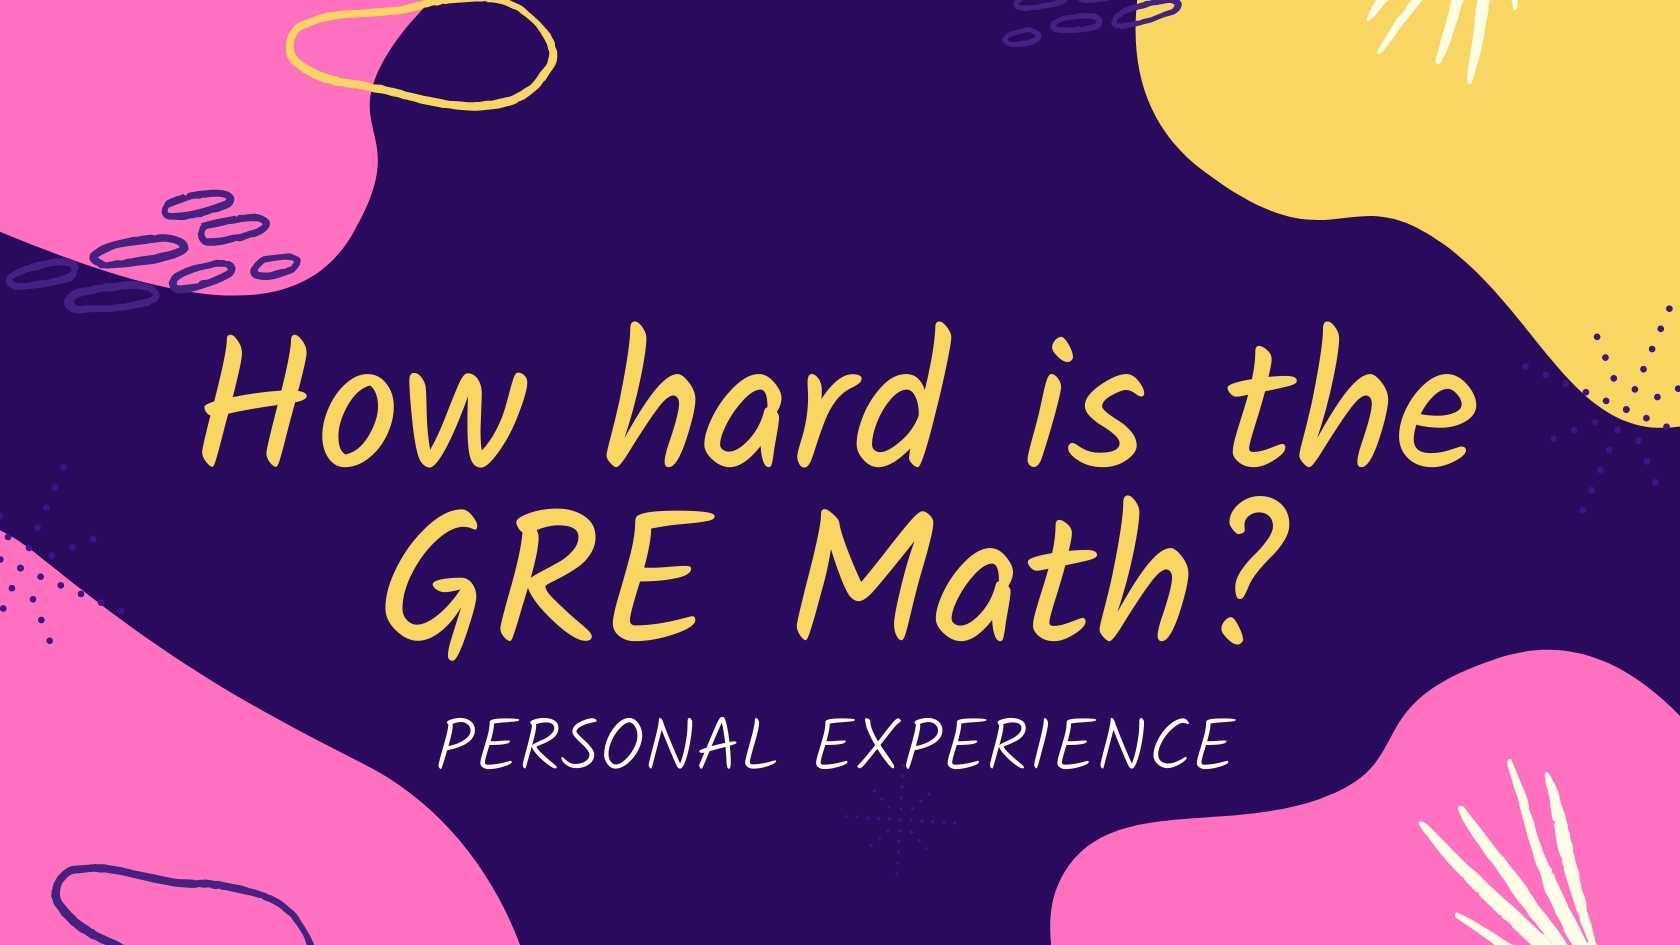 How hard is the GRE Maths? Personal Expereince